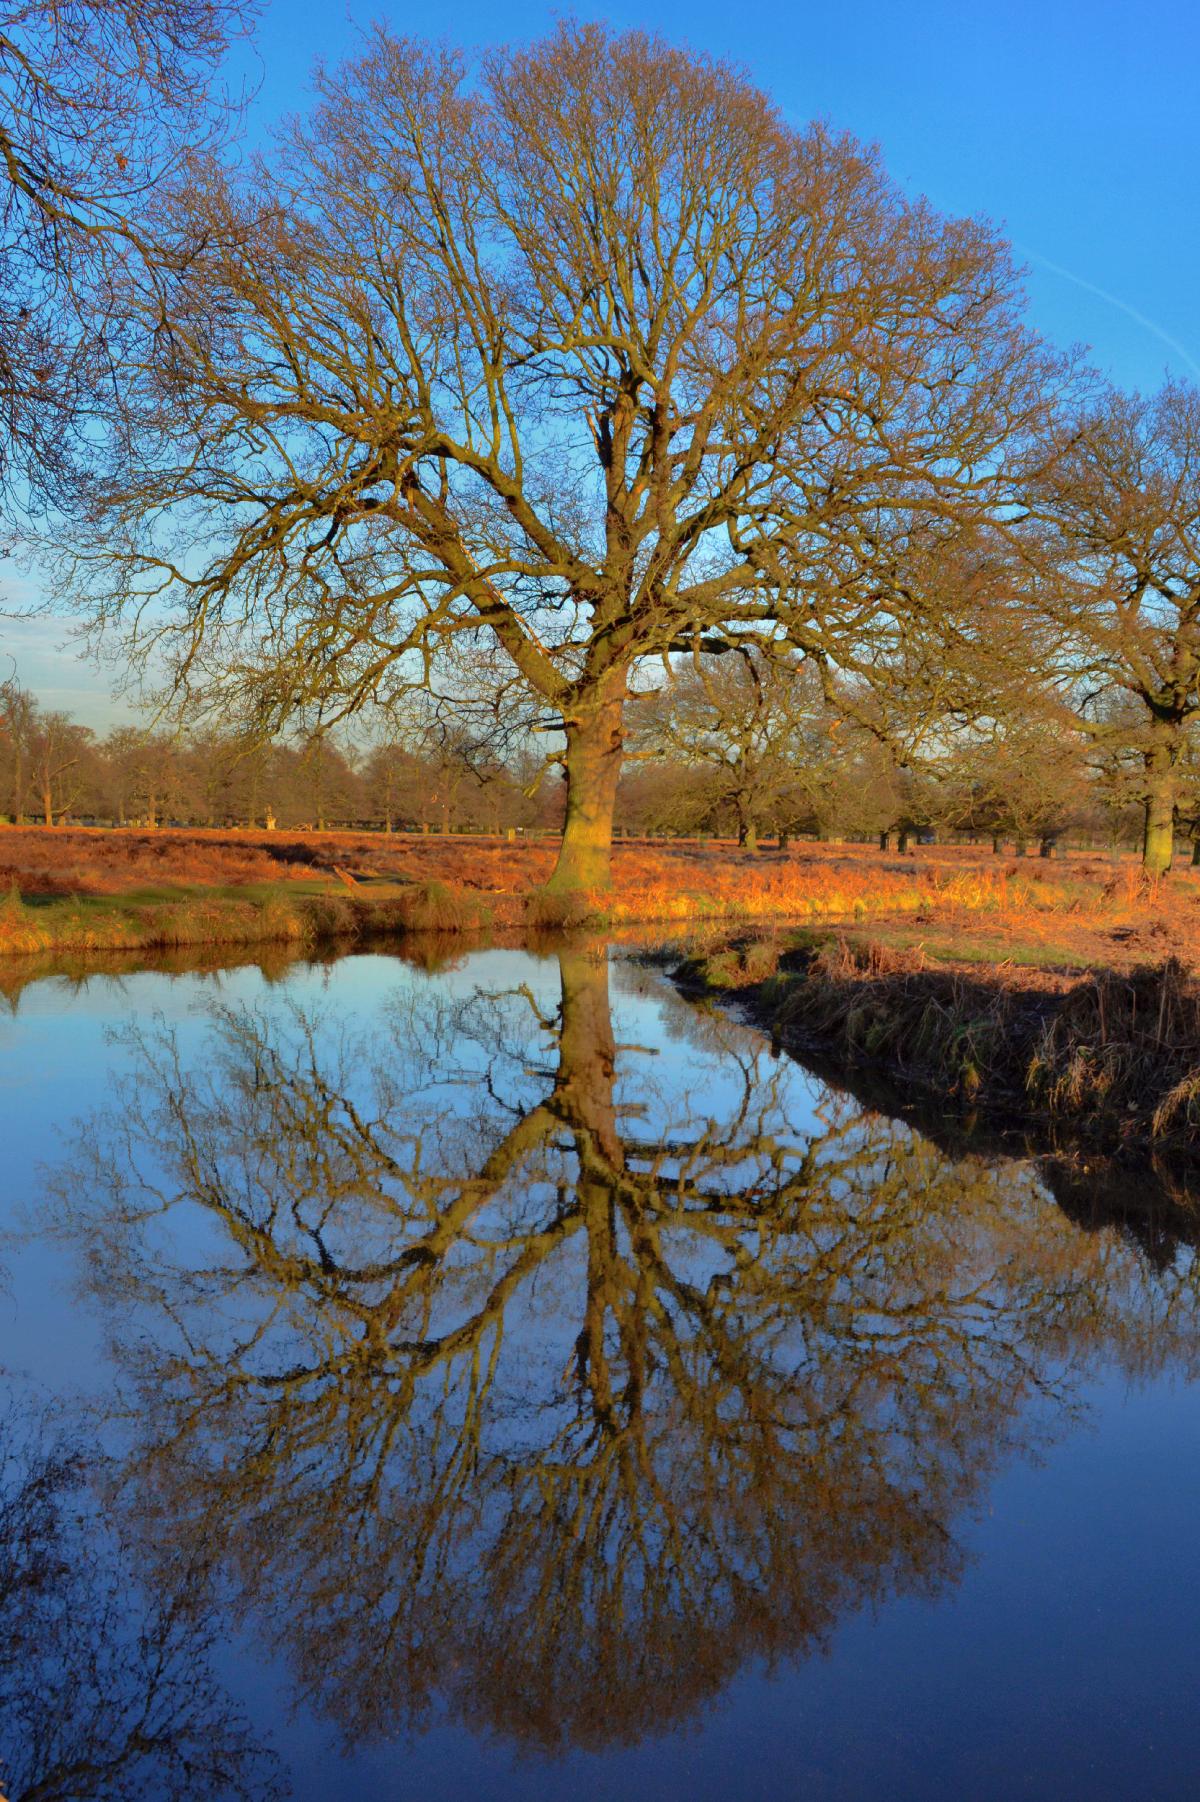 Andy Scott sent in this photo of trees reflecting in the water in Bushy Park